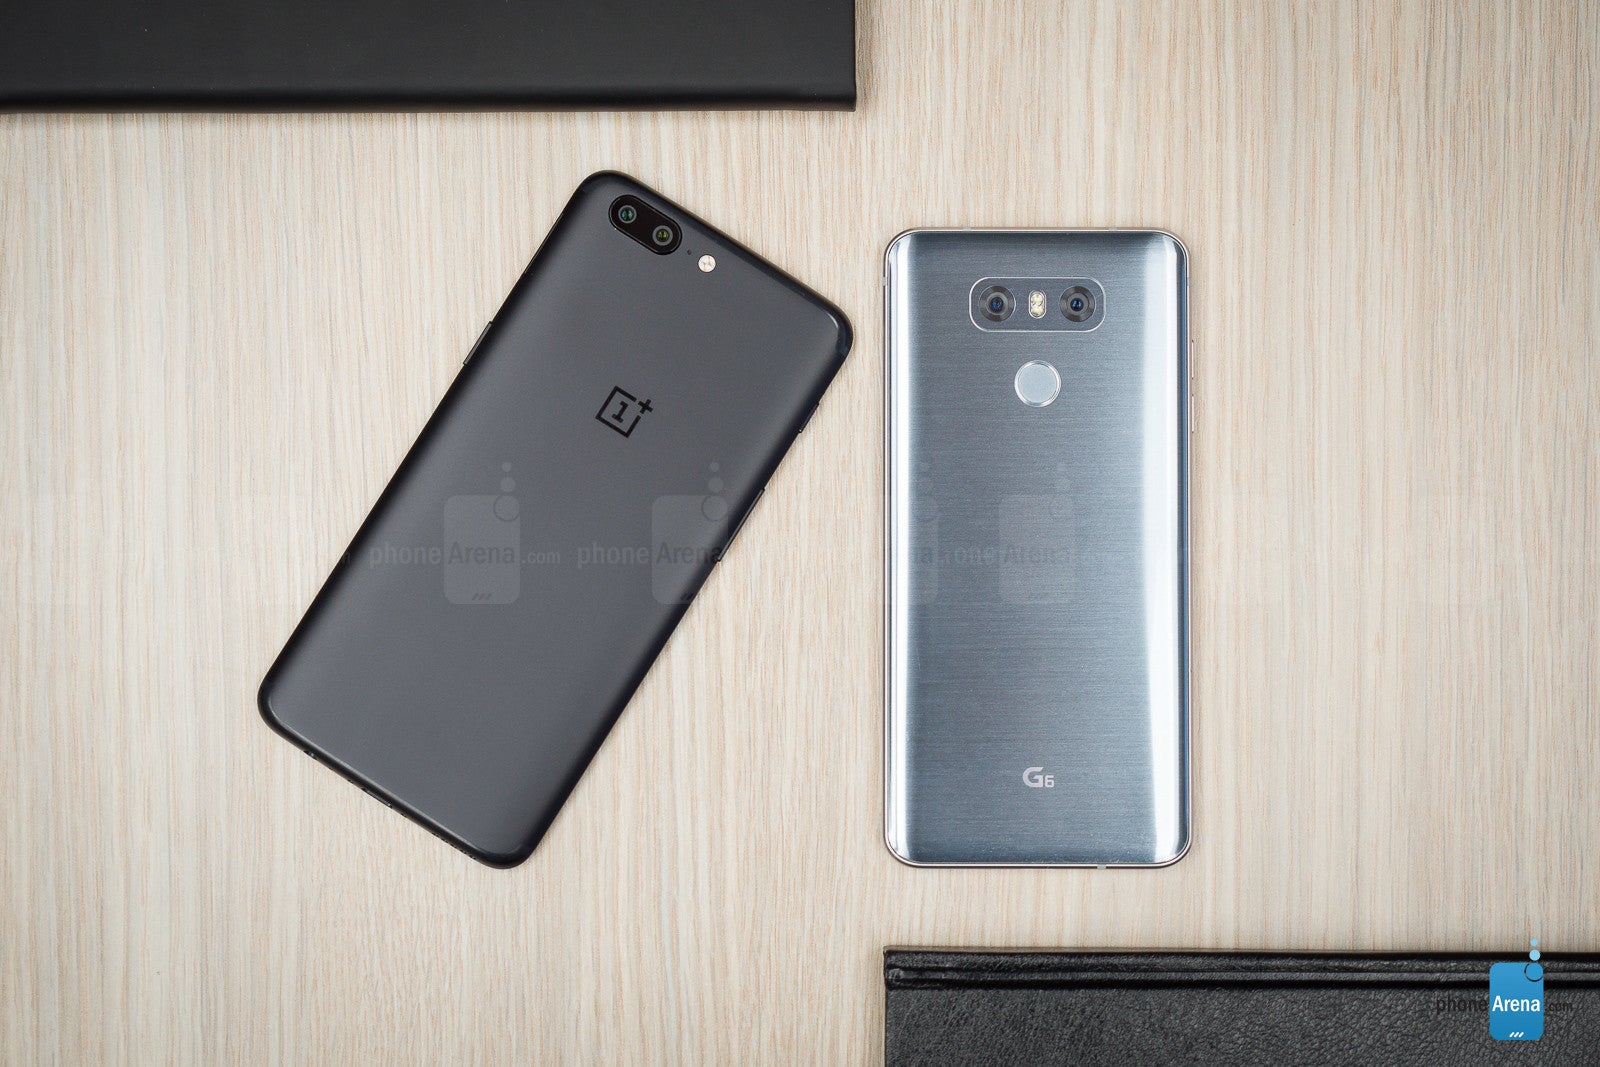 LG should learn a thing or two from OnePlus' success